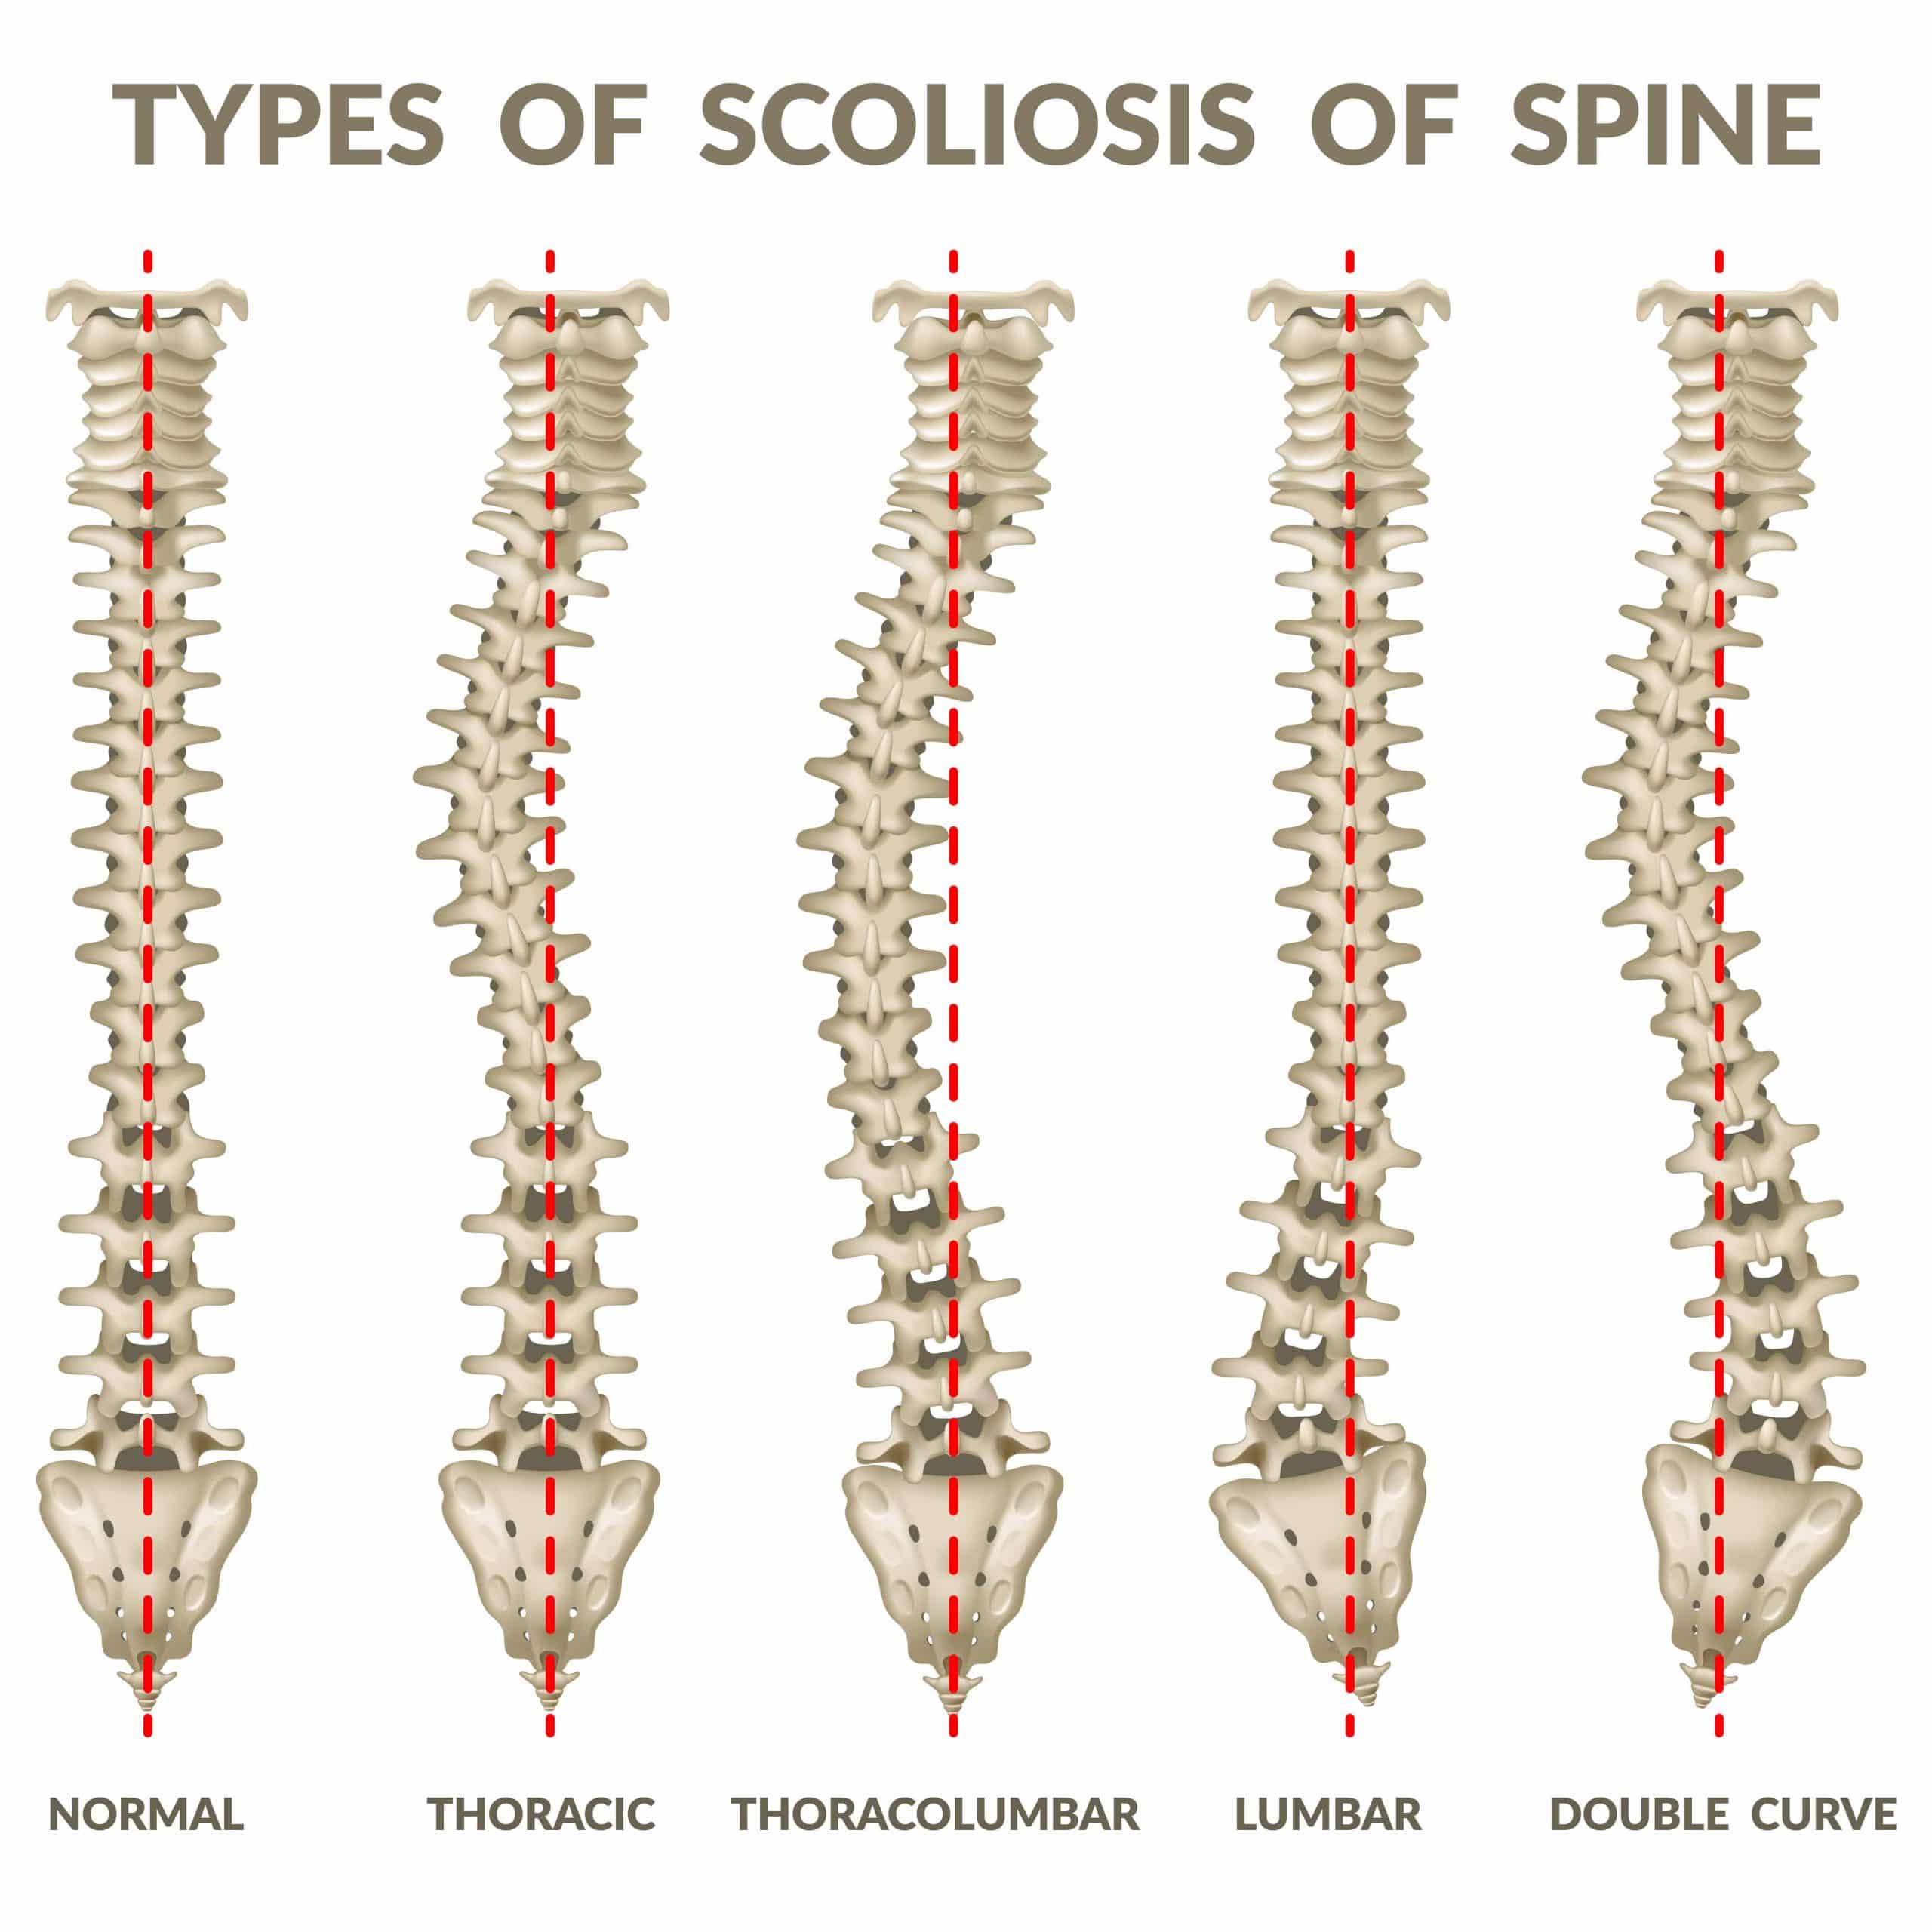 Scoliosis types chart showing 5 types of scoliosis that chiropractors can treat